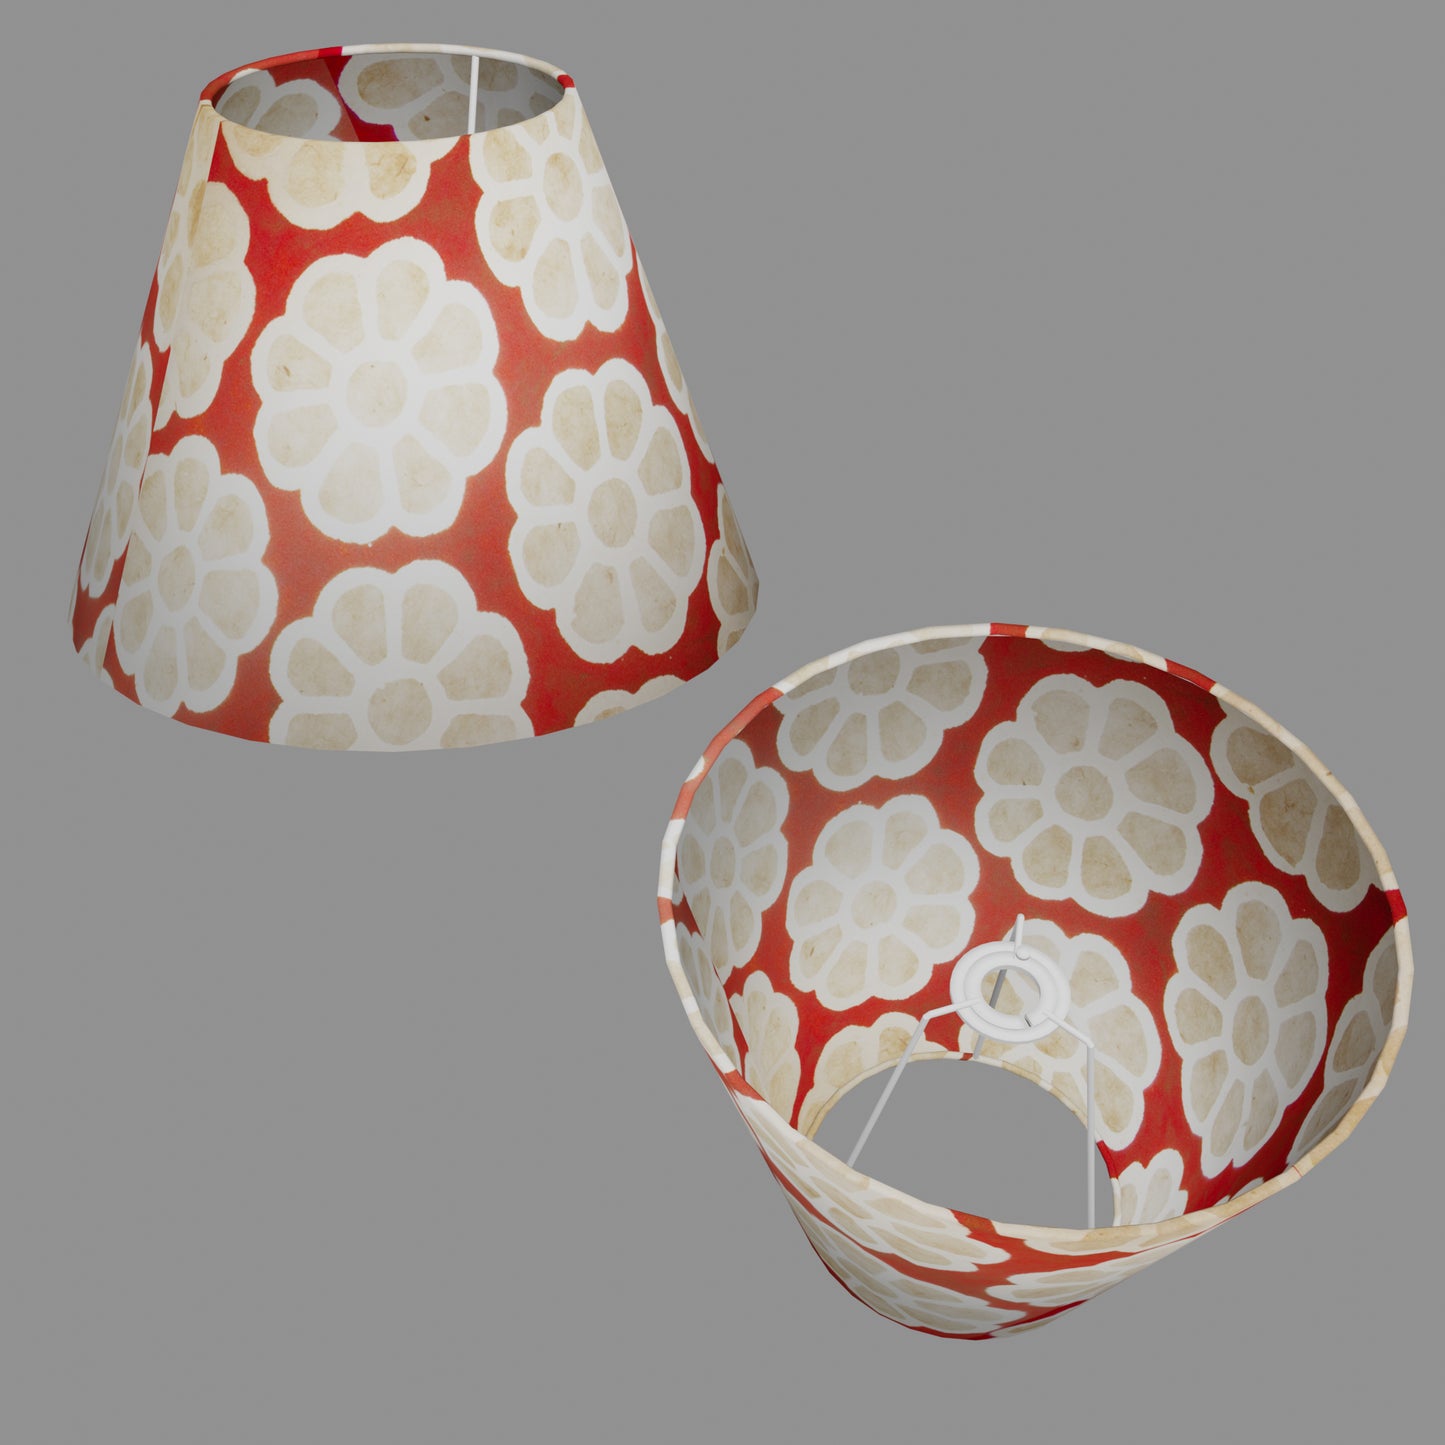 Conical Lamp Shade P18 - Batik Big Flower on Red, 15cm(top) x 30cm(bottom) x 22cm(height)